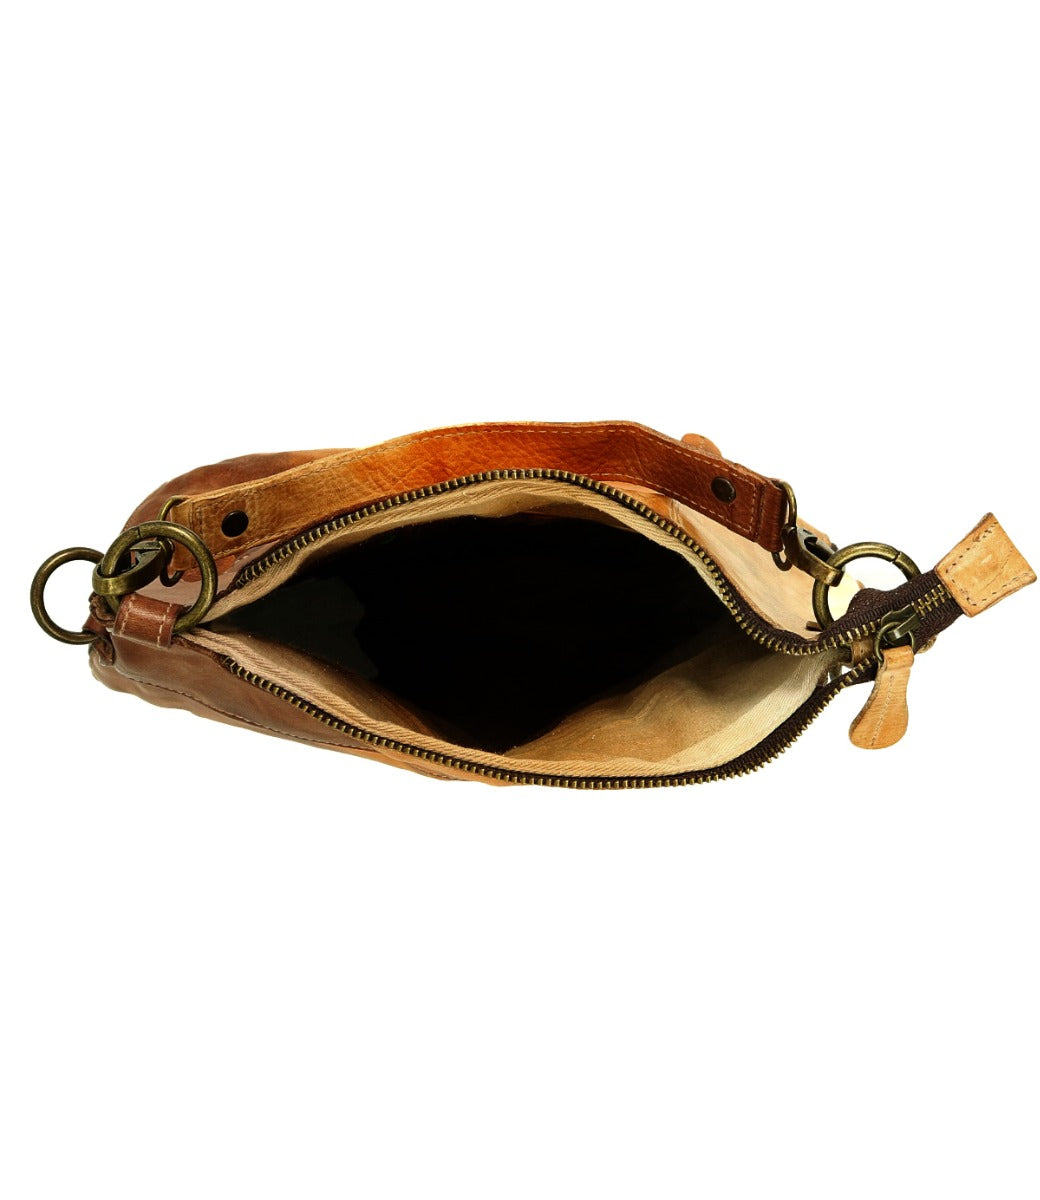 The inside of a Tahiti brown leather purse from Bed Stu.